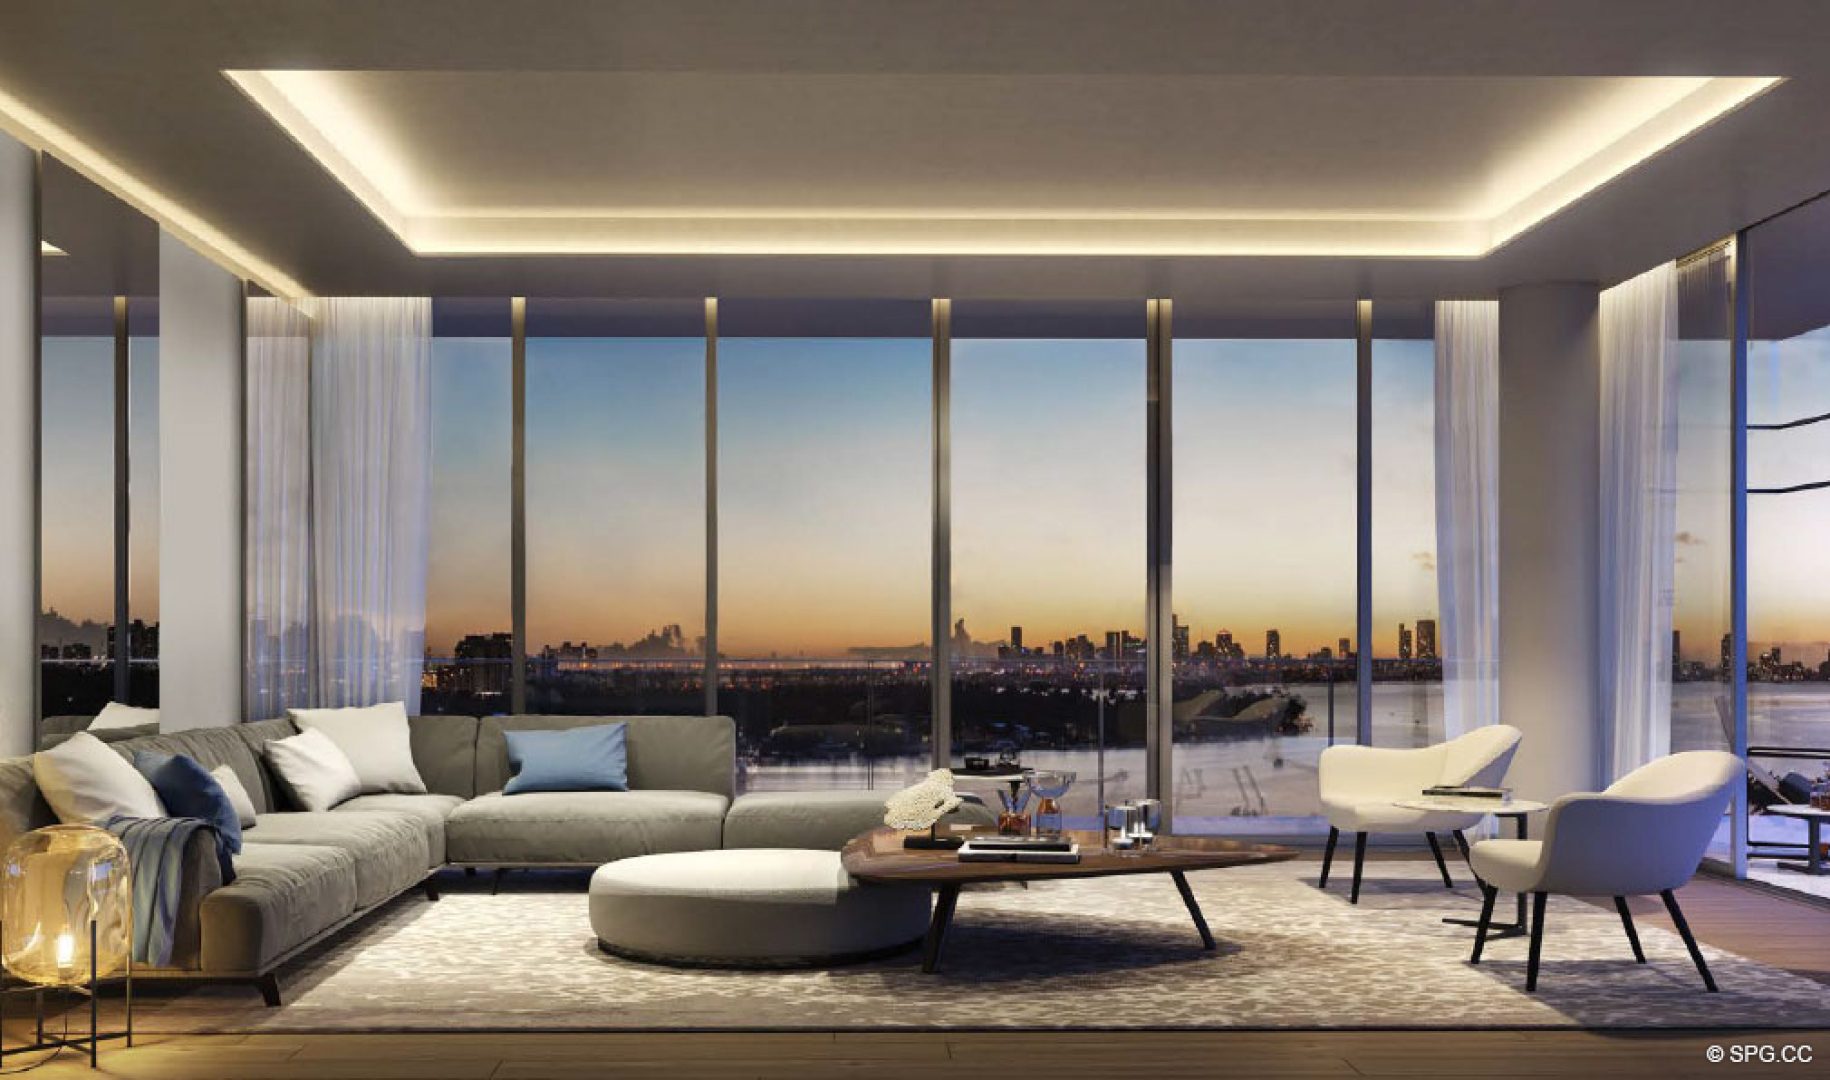 Expansive Living Room in 3900 Alton, Luxury Waterfront Condos in Miami Beach, Florida 33140